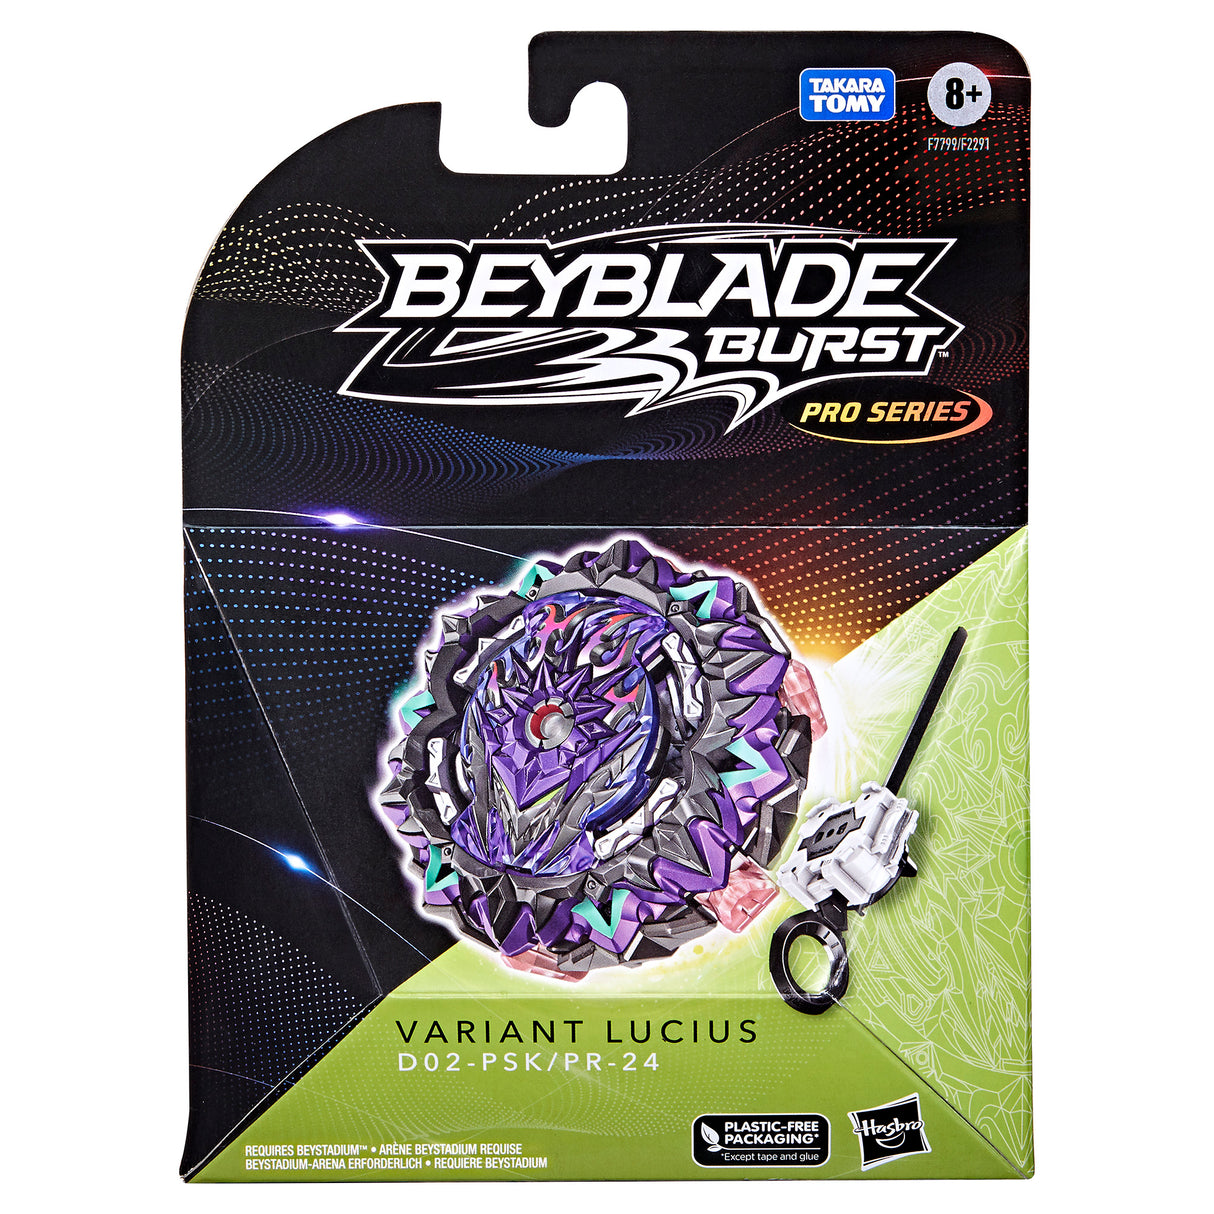 Beyblade Pro Series - Variant Lucius